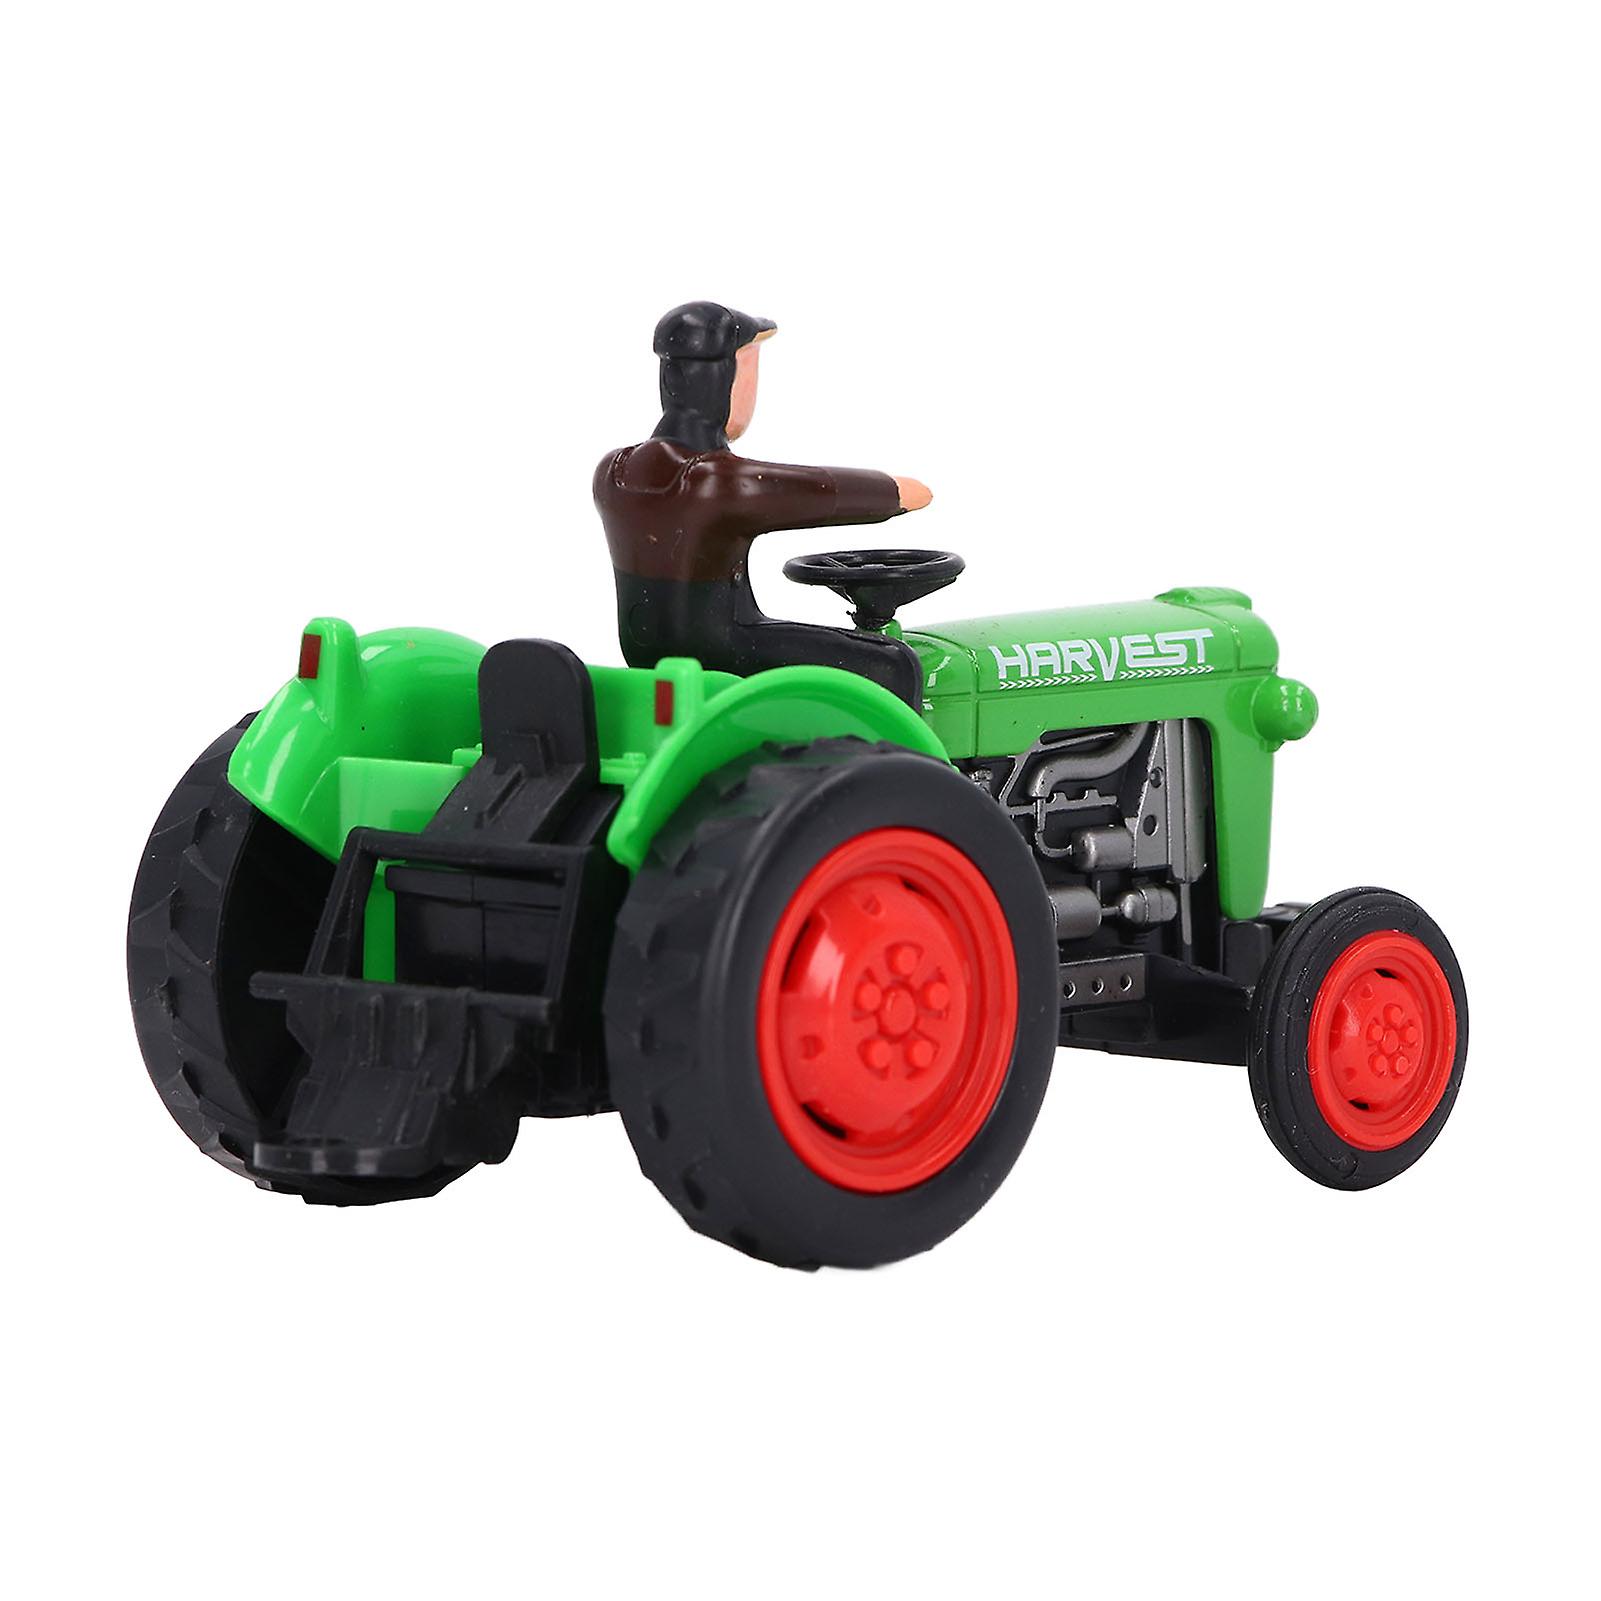 Simulation Tractor Vehicle Model Sturdy Alloy Engineering Farmer Car Toy For Childrengreen